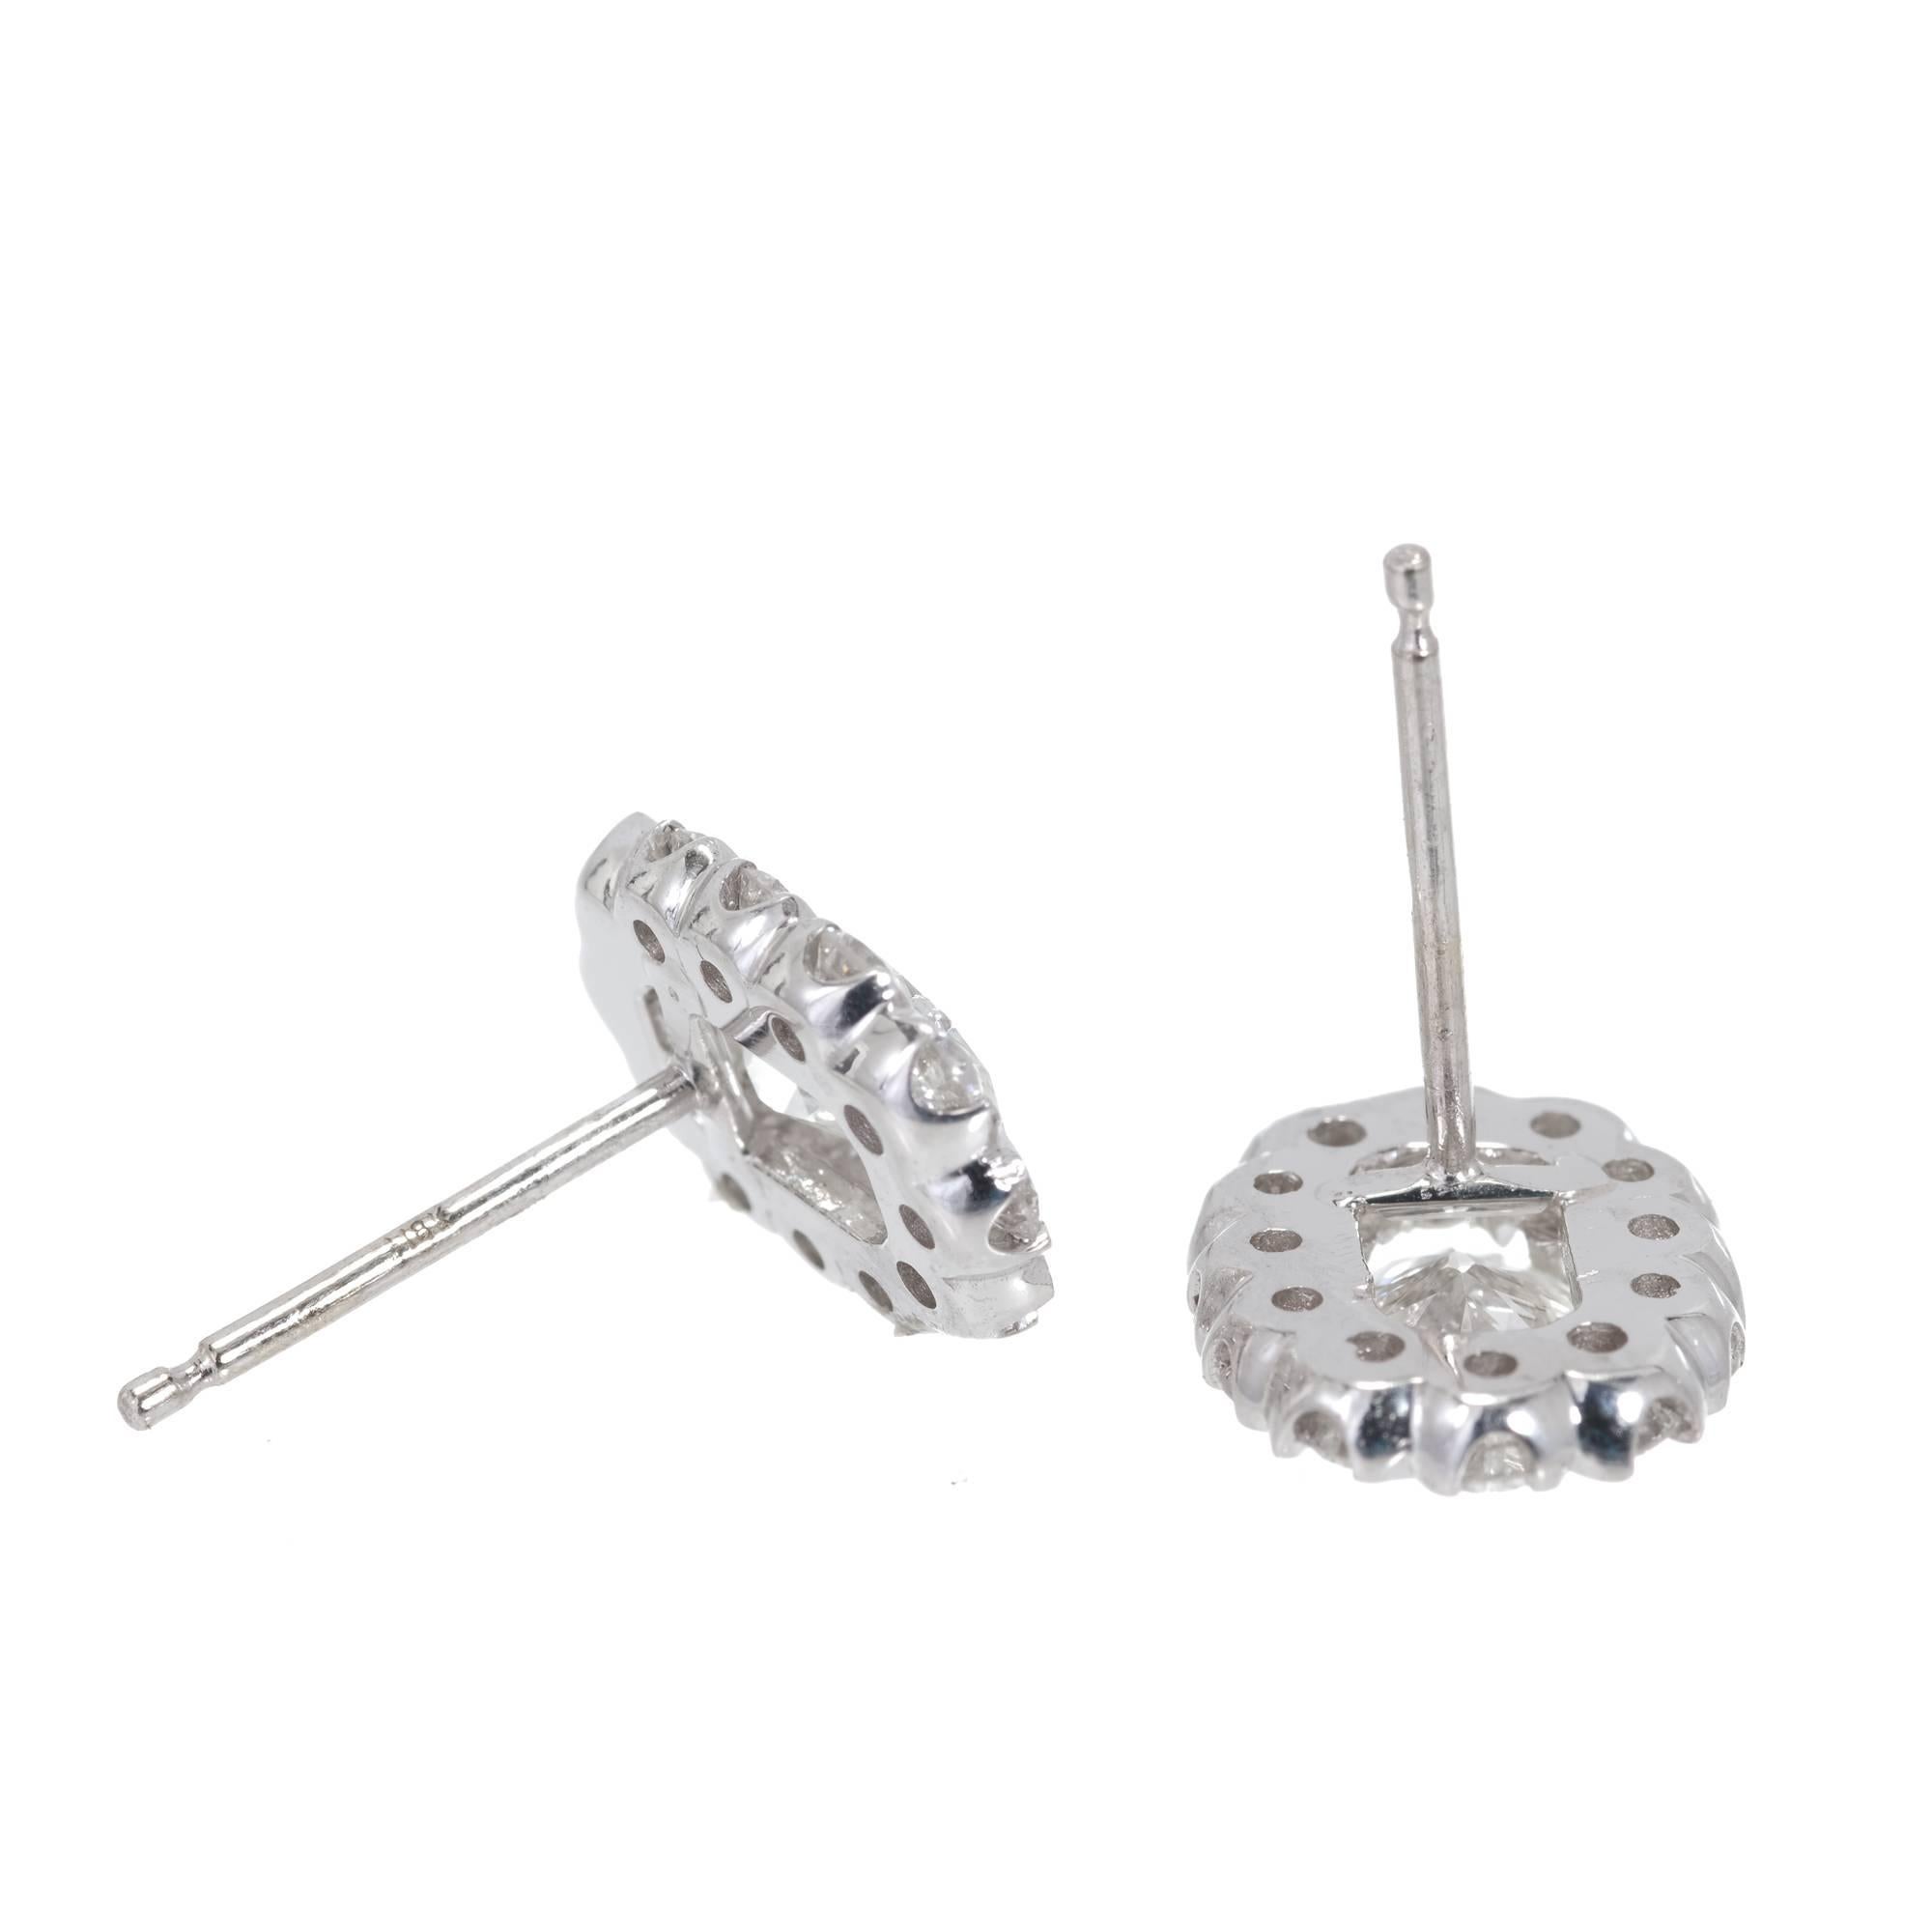 Simple antique style diamond halo design 14k white gold earrings. Halo design with top quality full cut diamonds held in place by small V sections surrounding the center stone. In this case the tops are oval surrounding the center stones which are